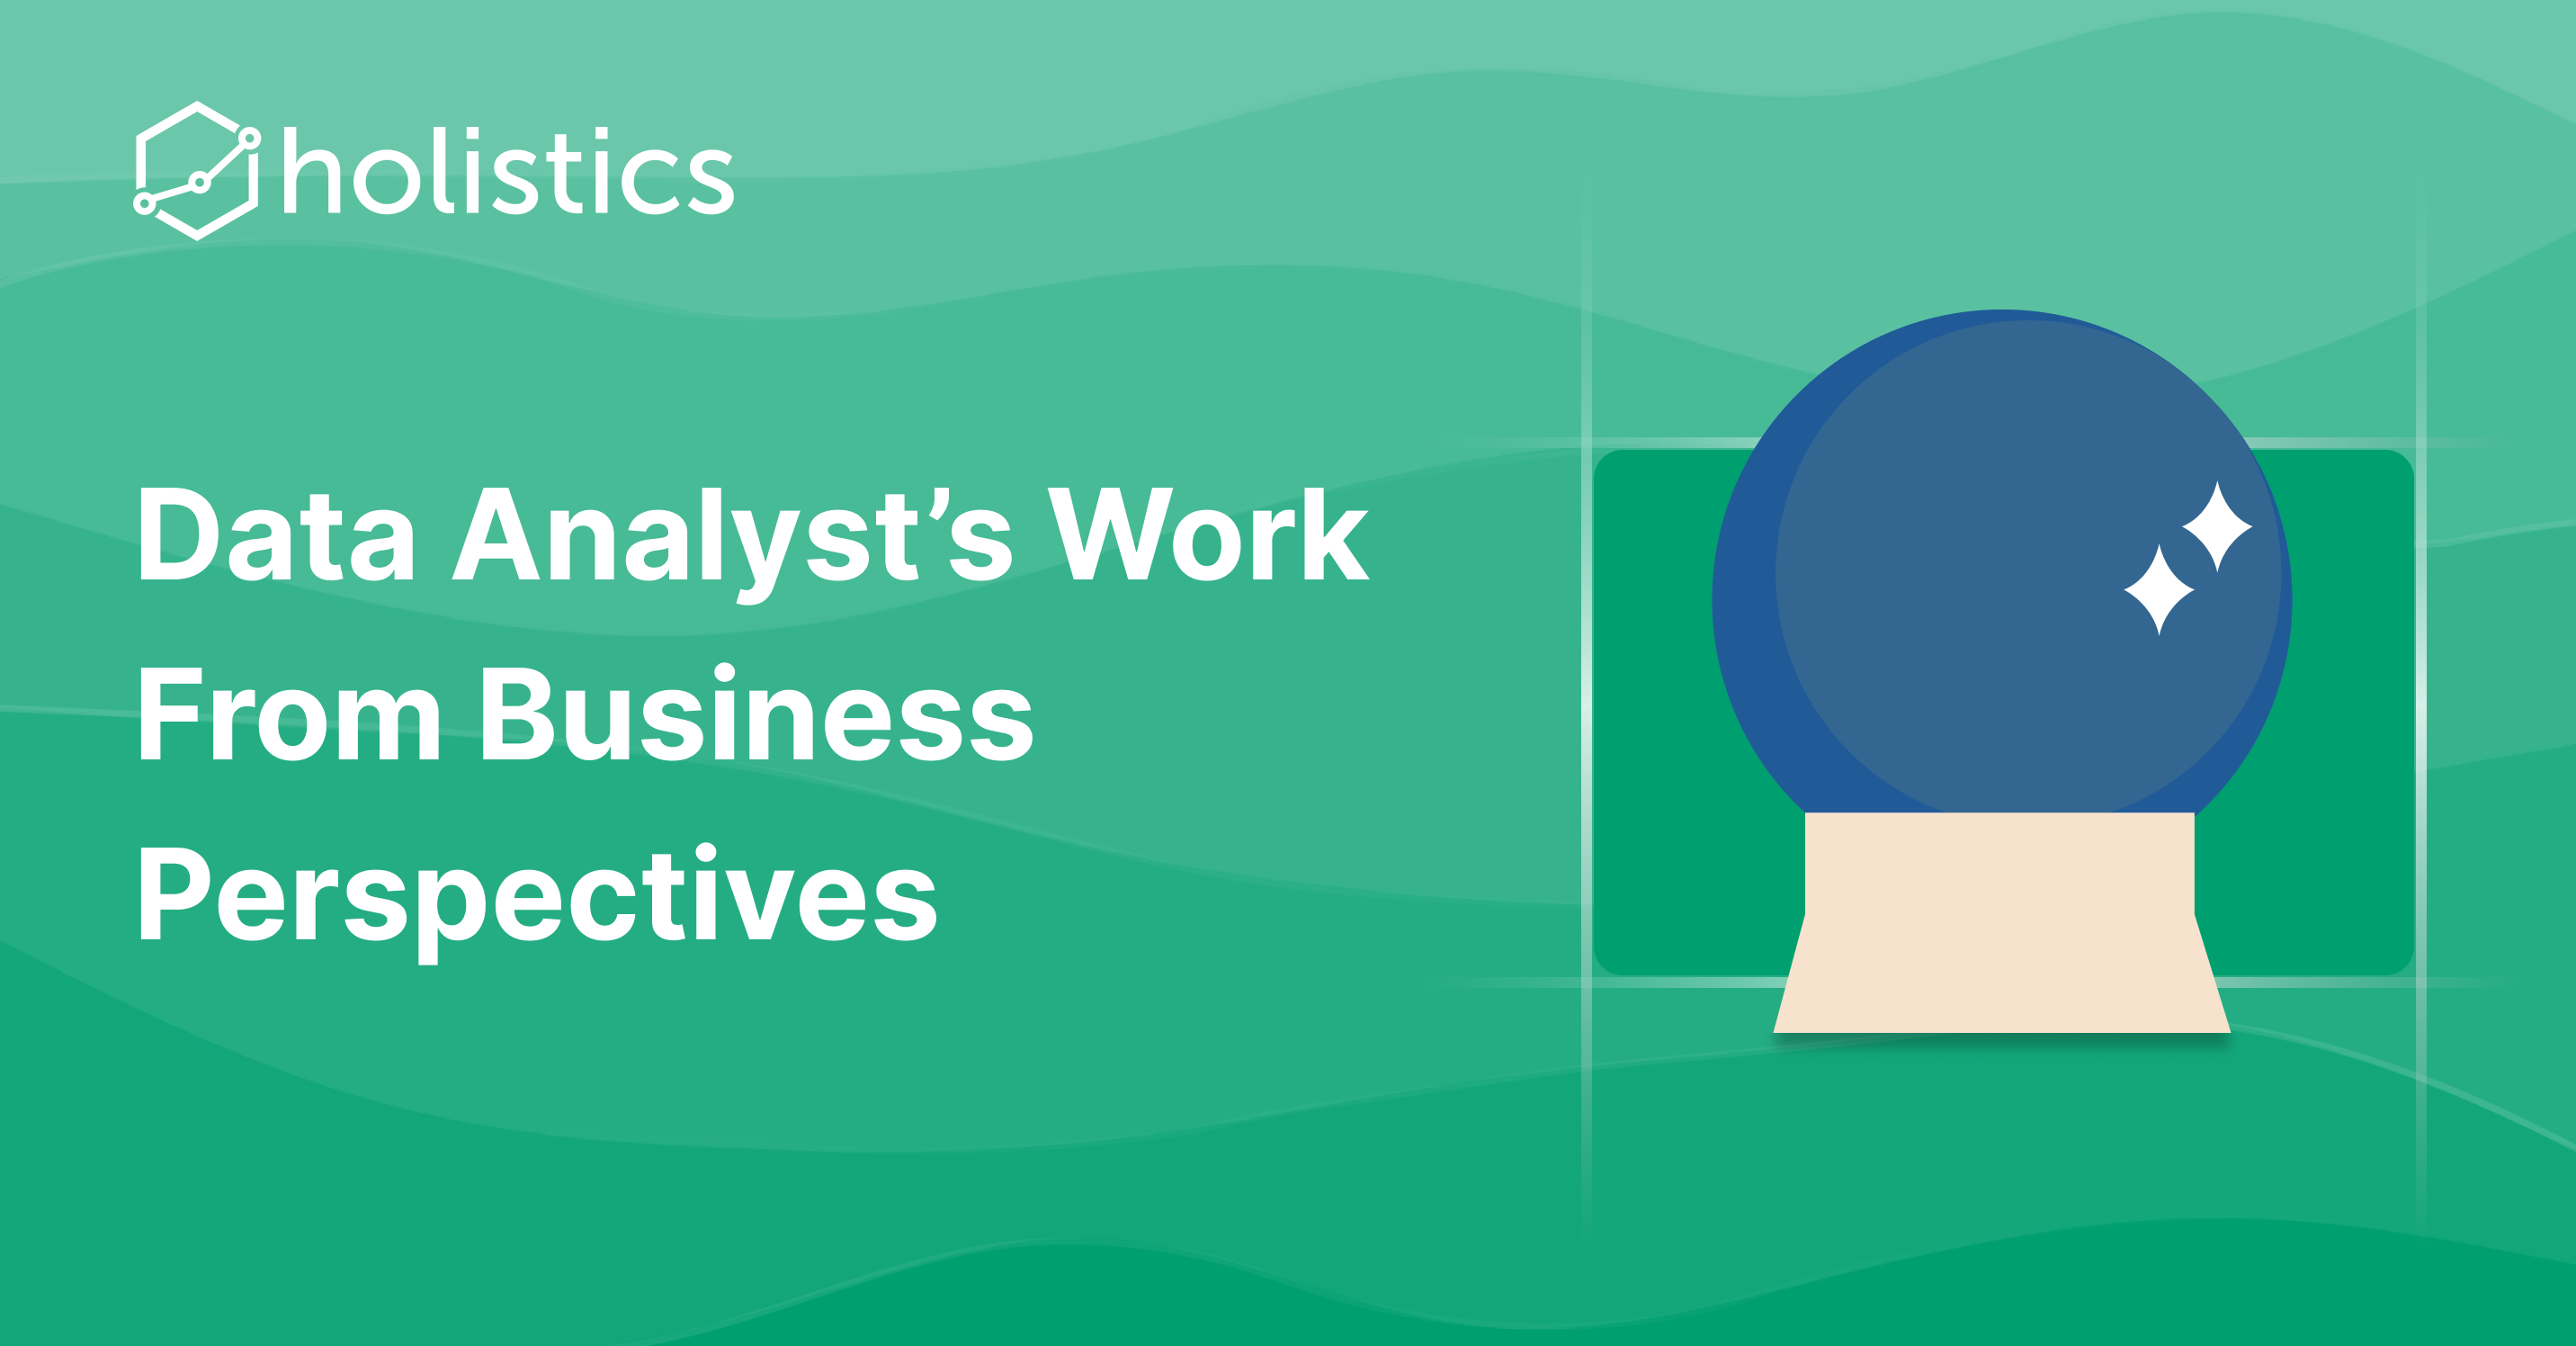 Data analysts, think about your work from the business stakeholders perspective